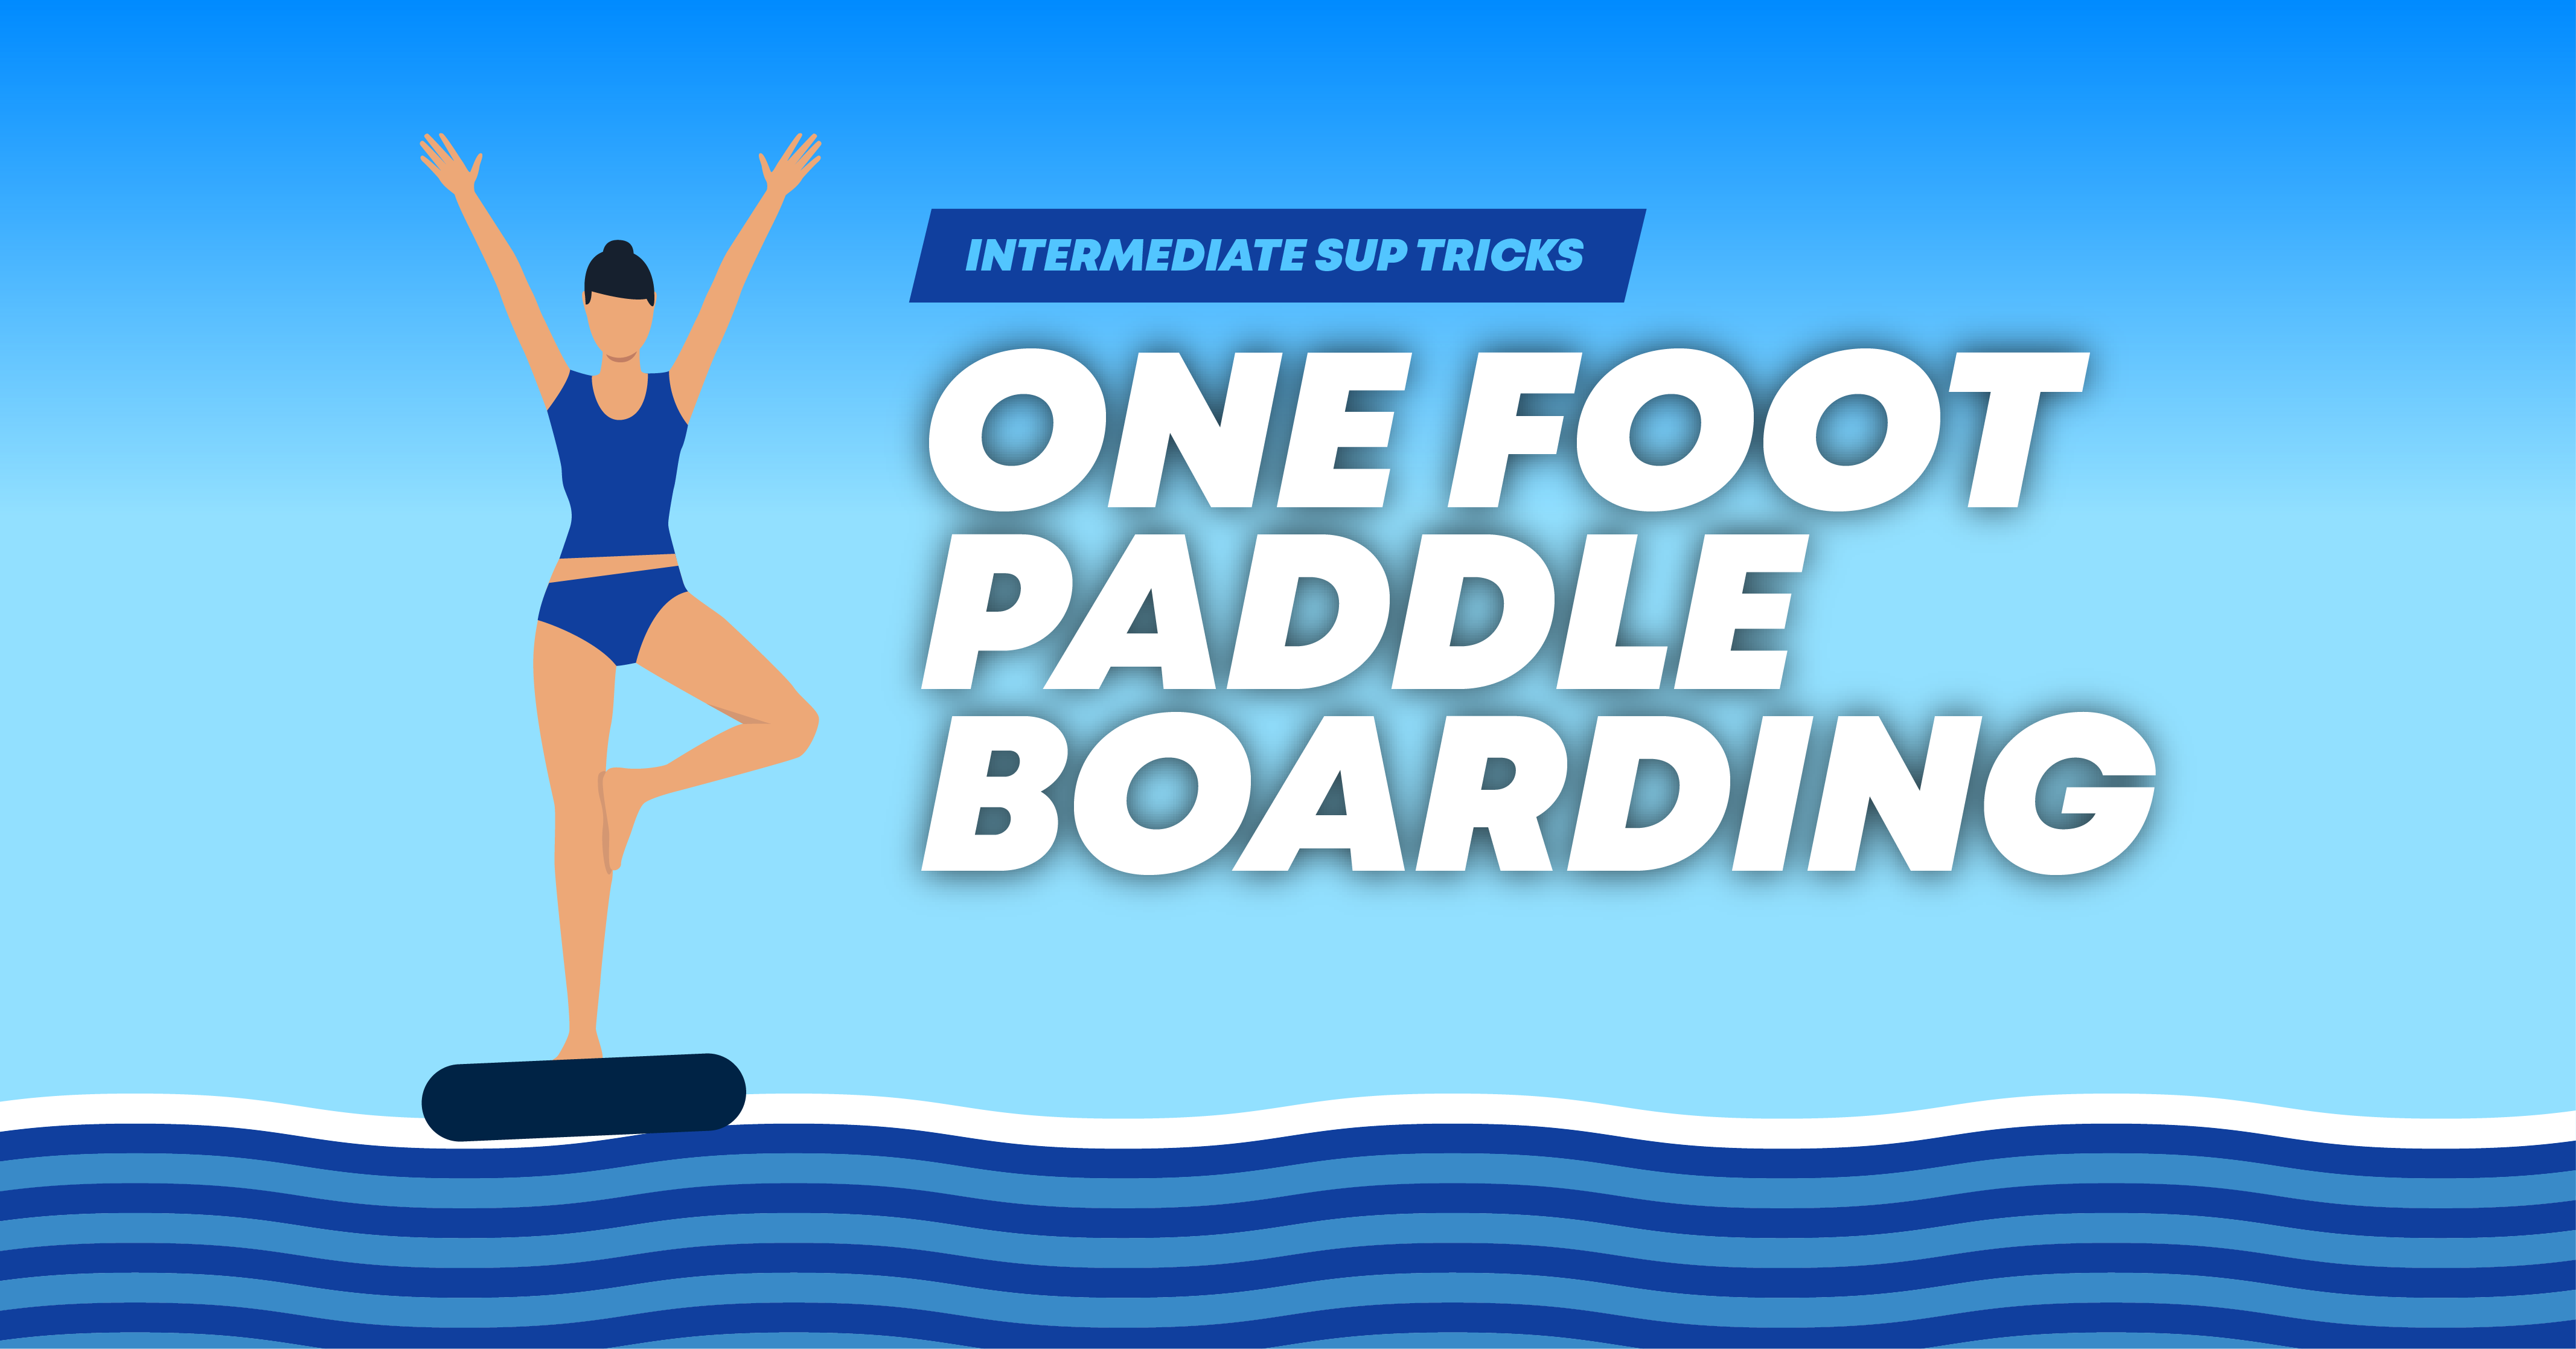 One foot paddle boarding